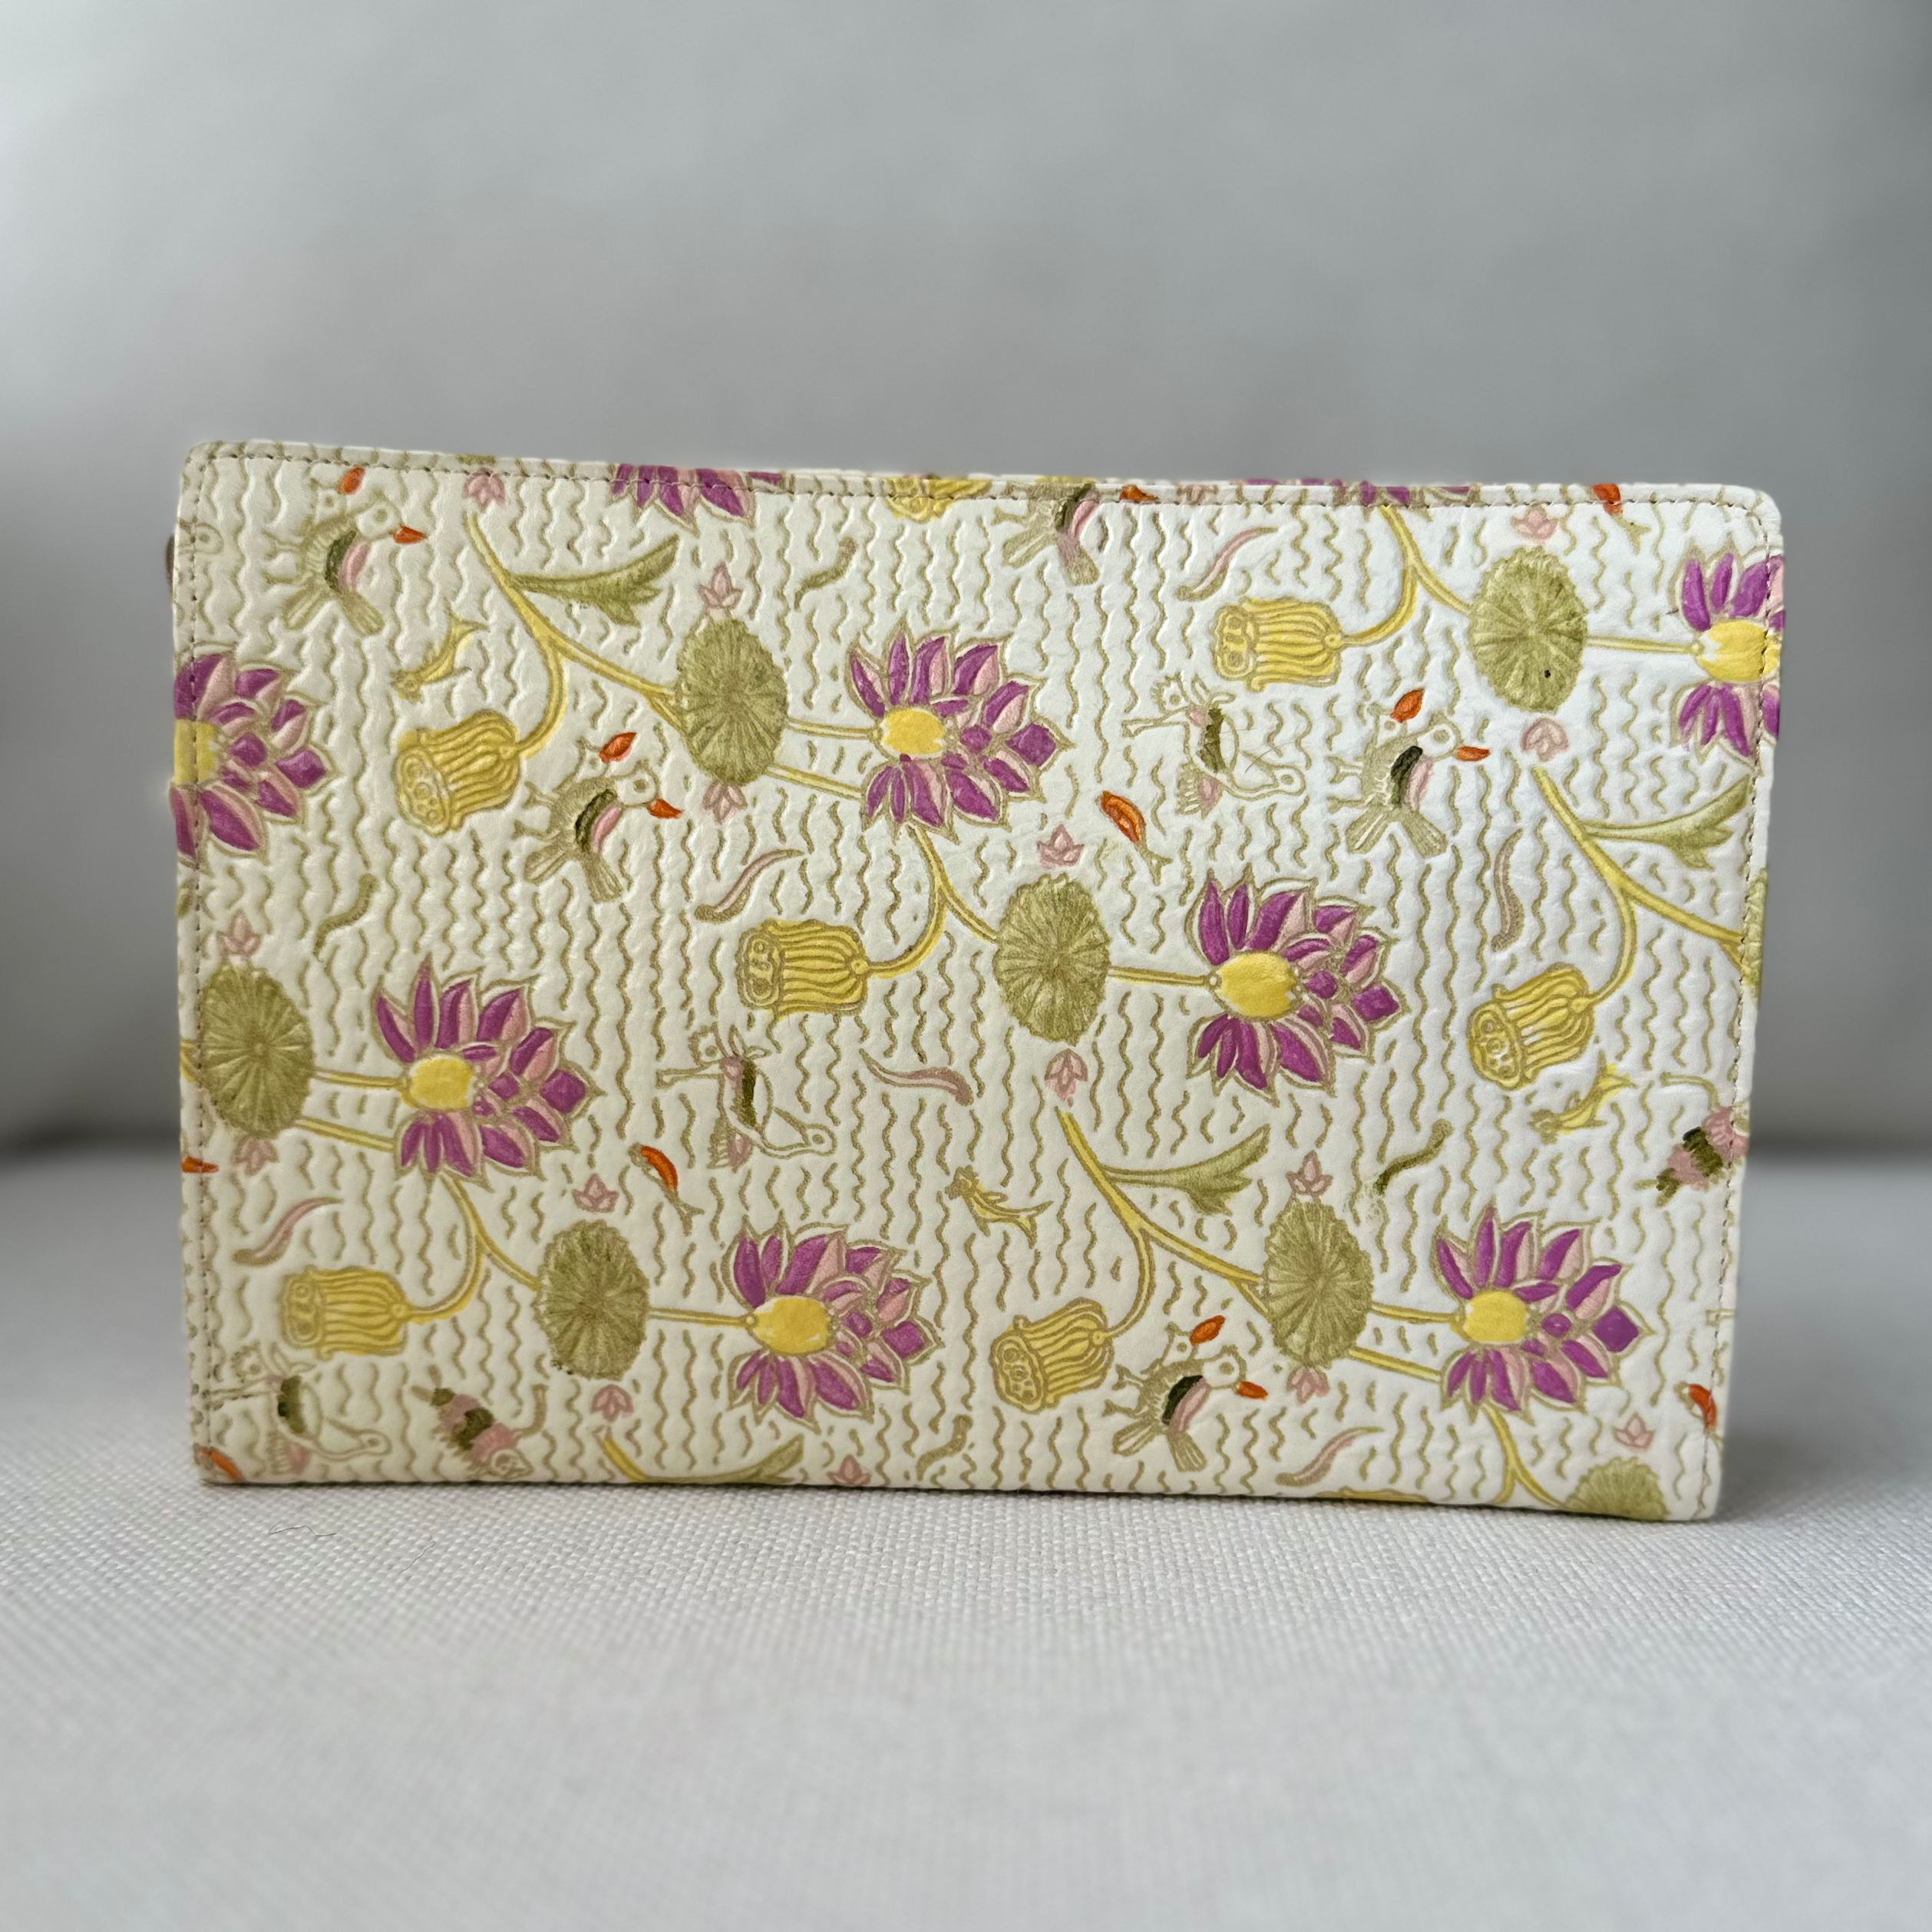 Handpanted Floral Clutch